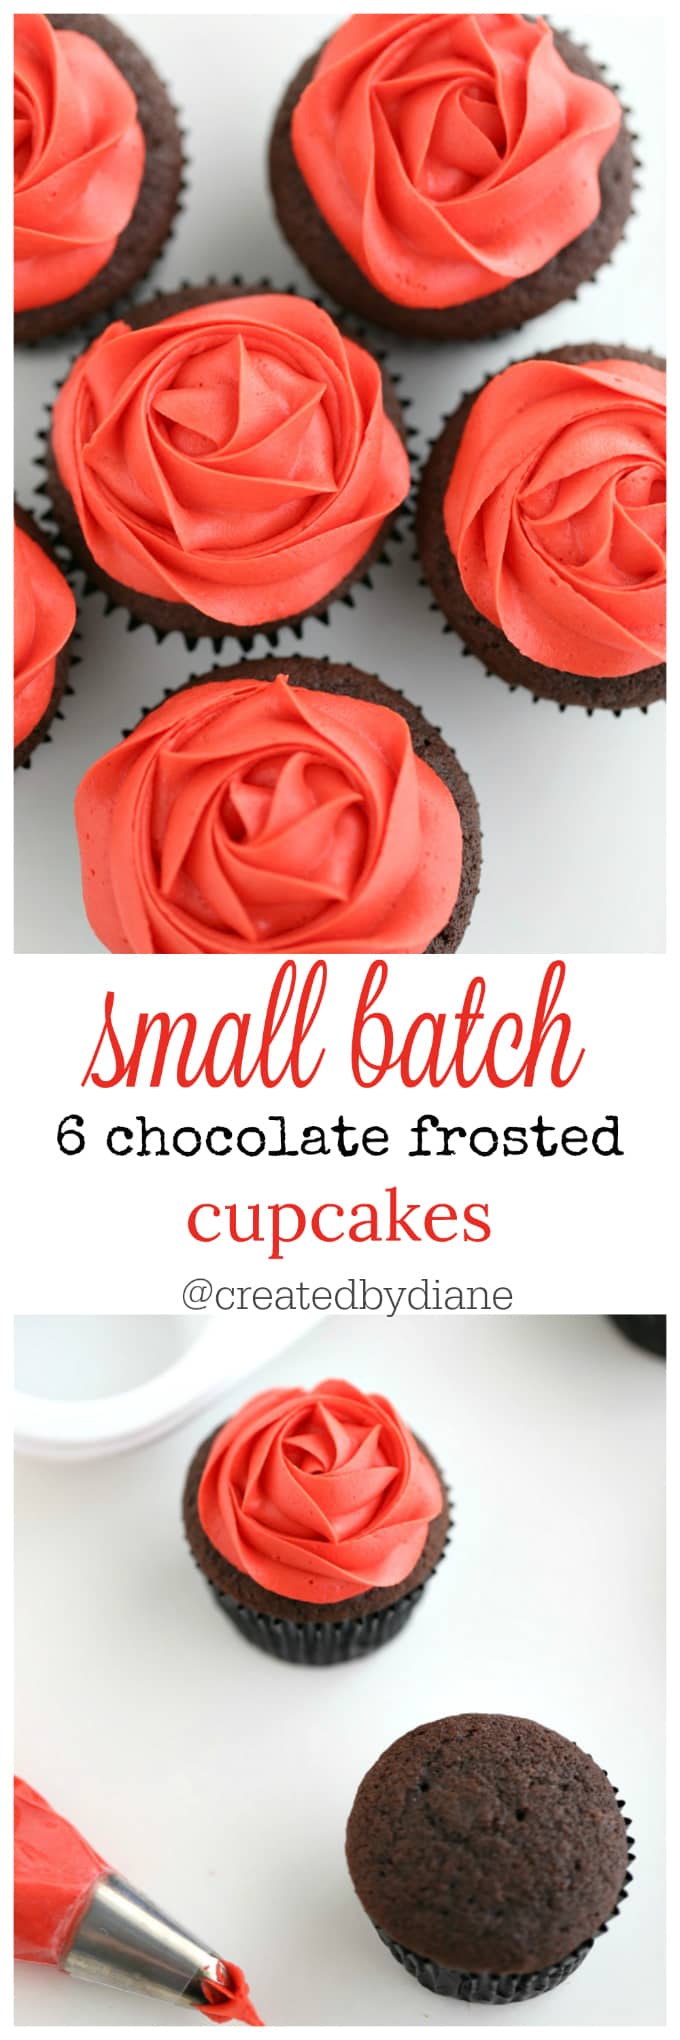 small batch 6 chocolate frosted cupcakes with silky smooth buttercream frosting @createdbydiane